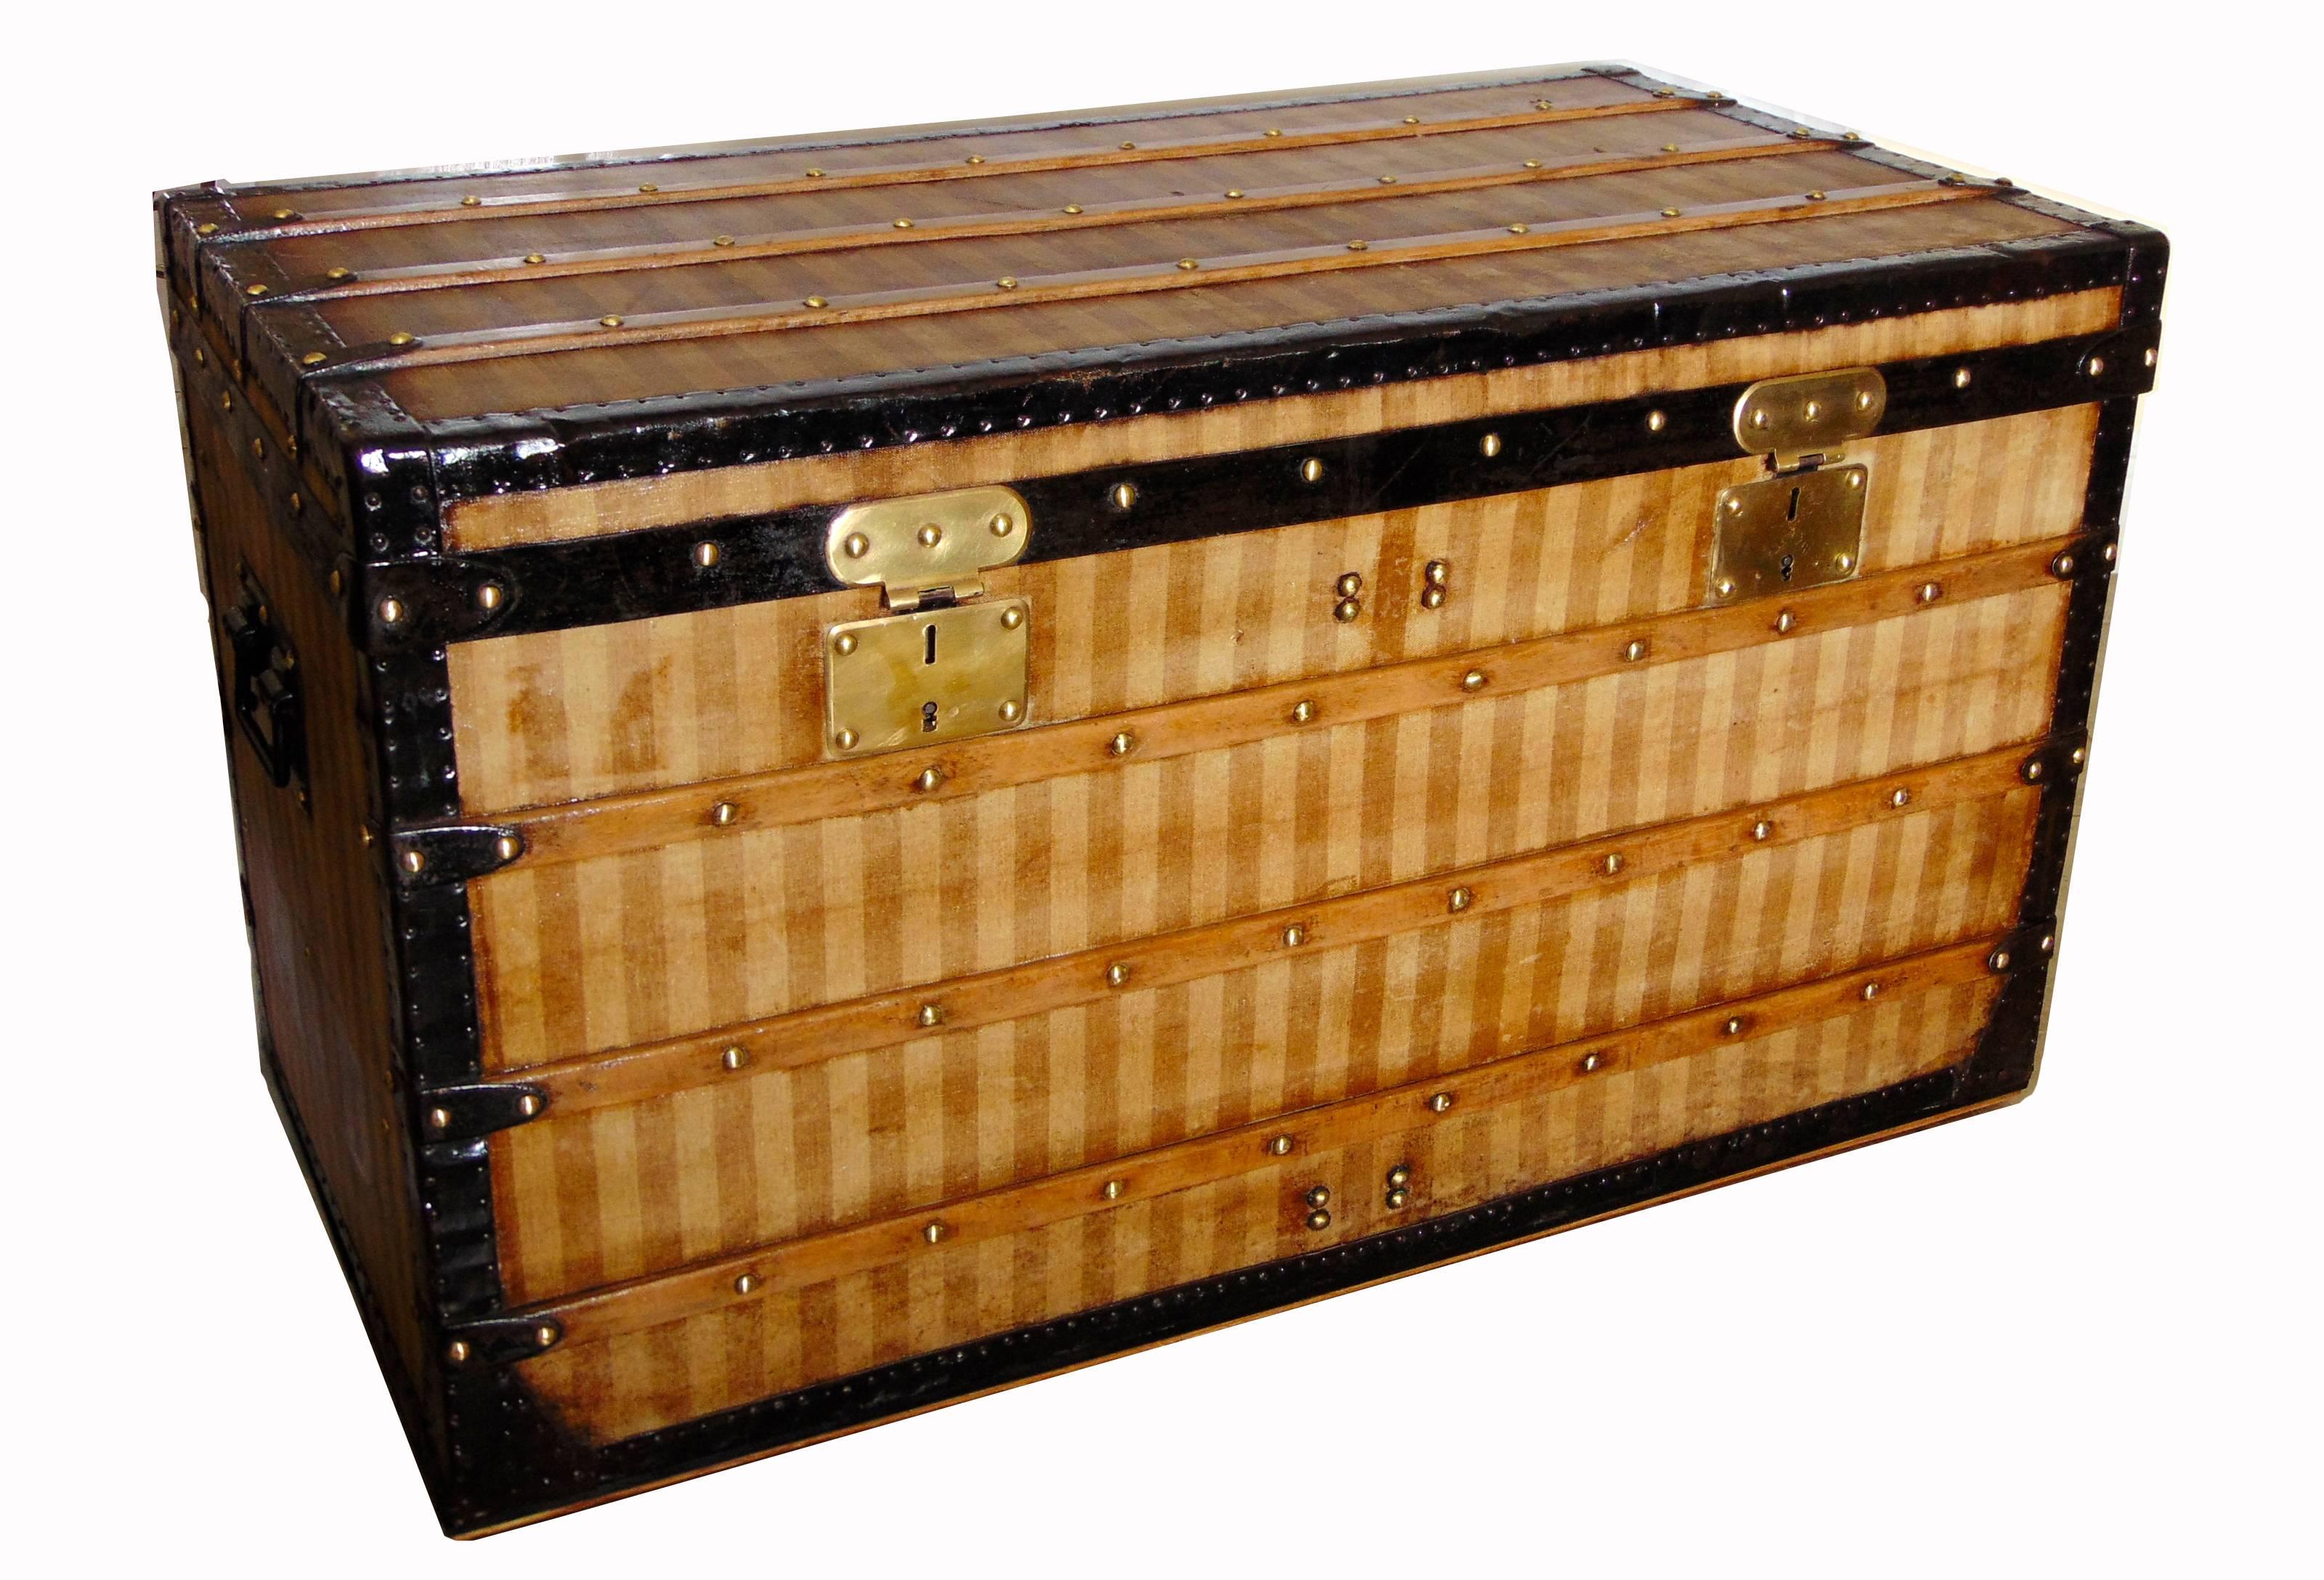 We love antique pieces with a story - and this Louis Vuitton Rayée steamer trunk has an incredible one!  It was found in an abandoned storage locker in Slidell, Louisiana after Hurricane Katrina, where it had been sitting in water for nearly a